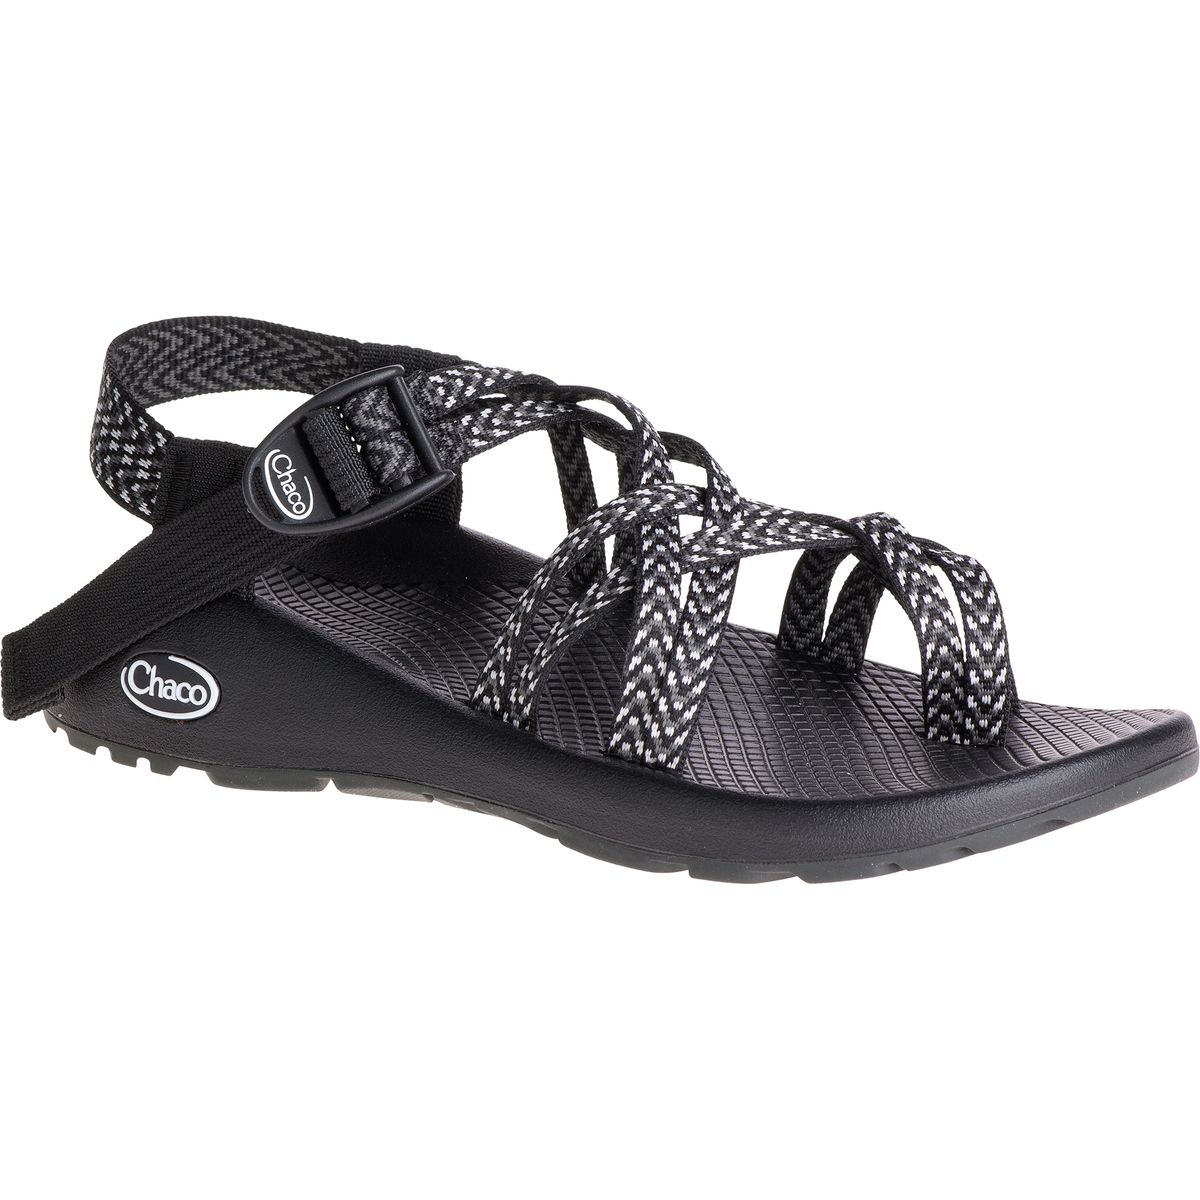 chacos size 9 wide